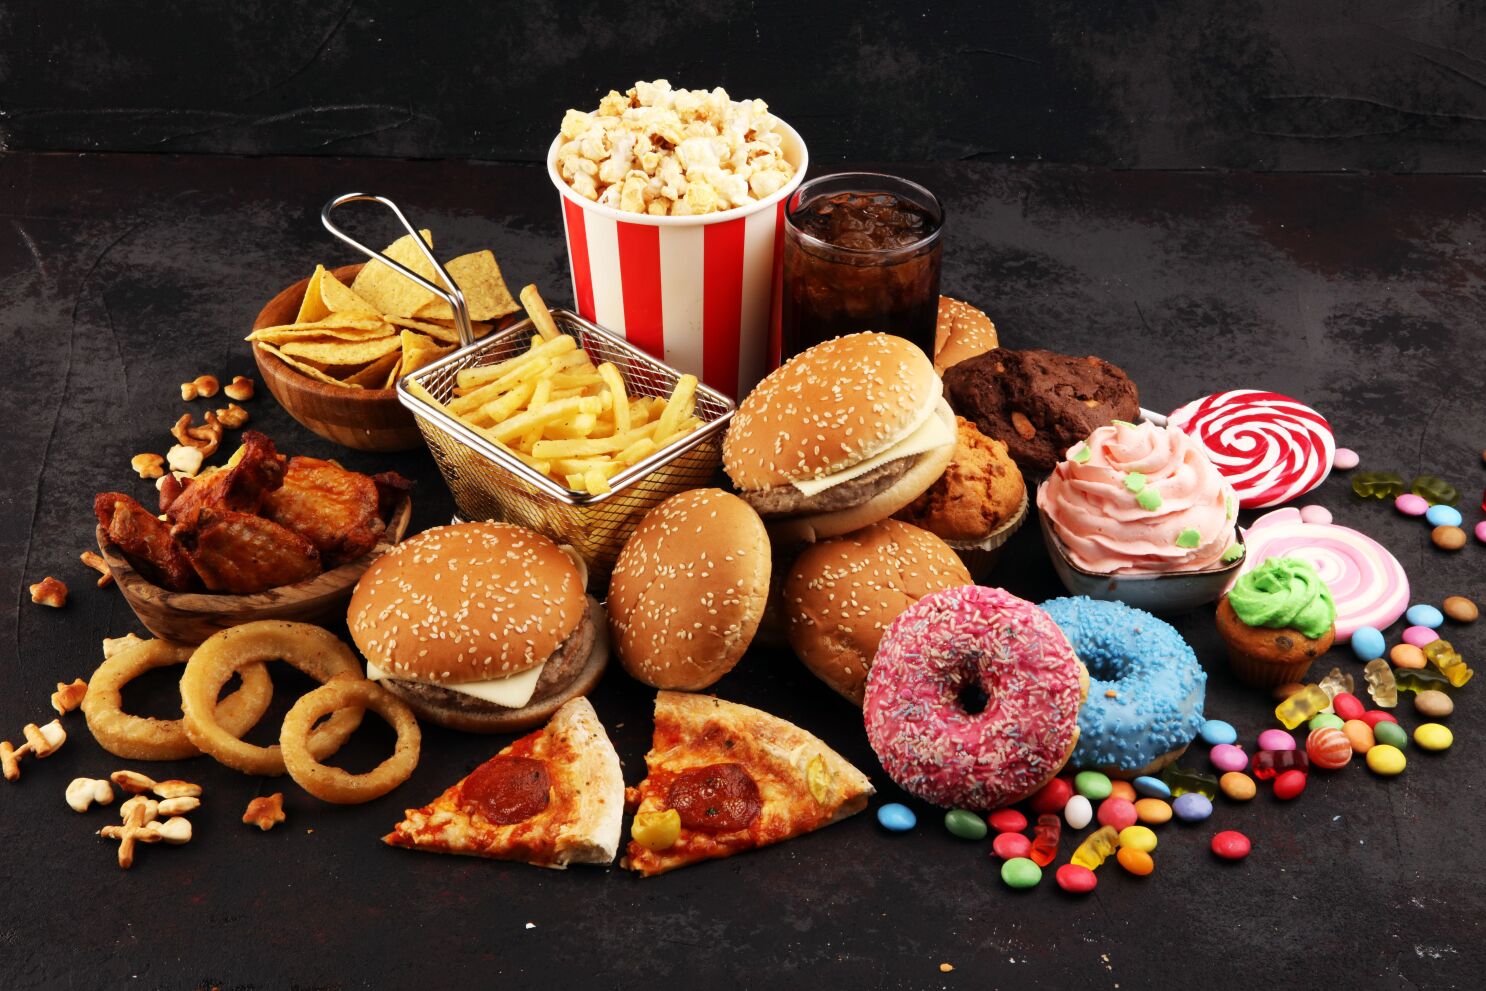 Junk Food, Delicious But Danger to Health